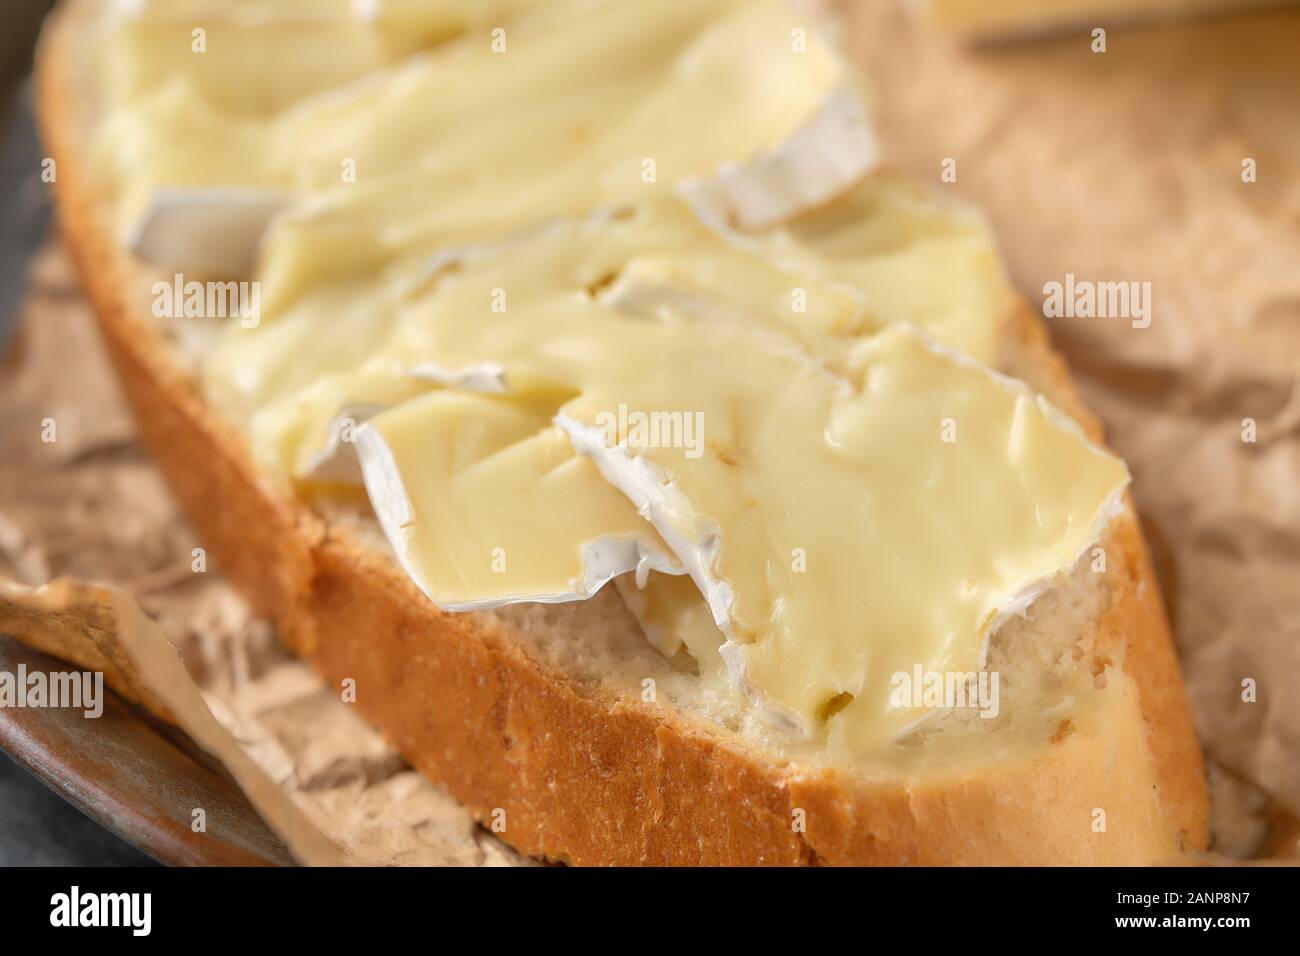 Macro photo with shallow depth of field of bread with brie cheese Stock Photo